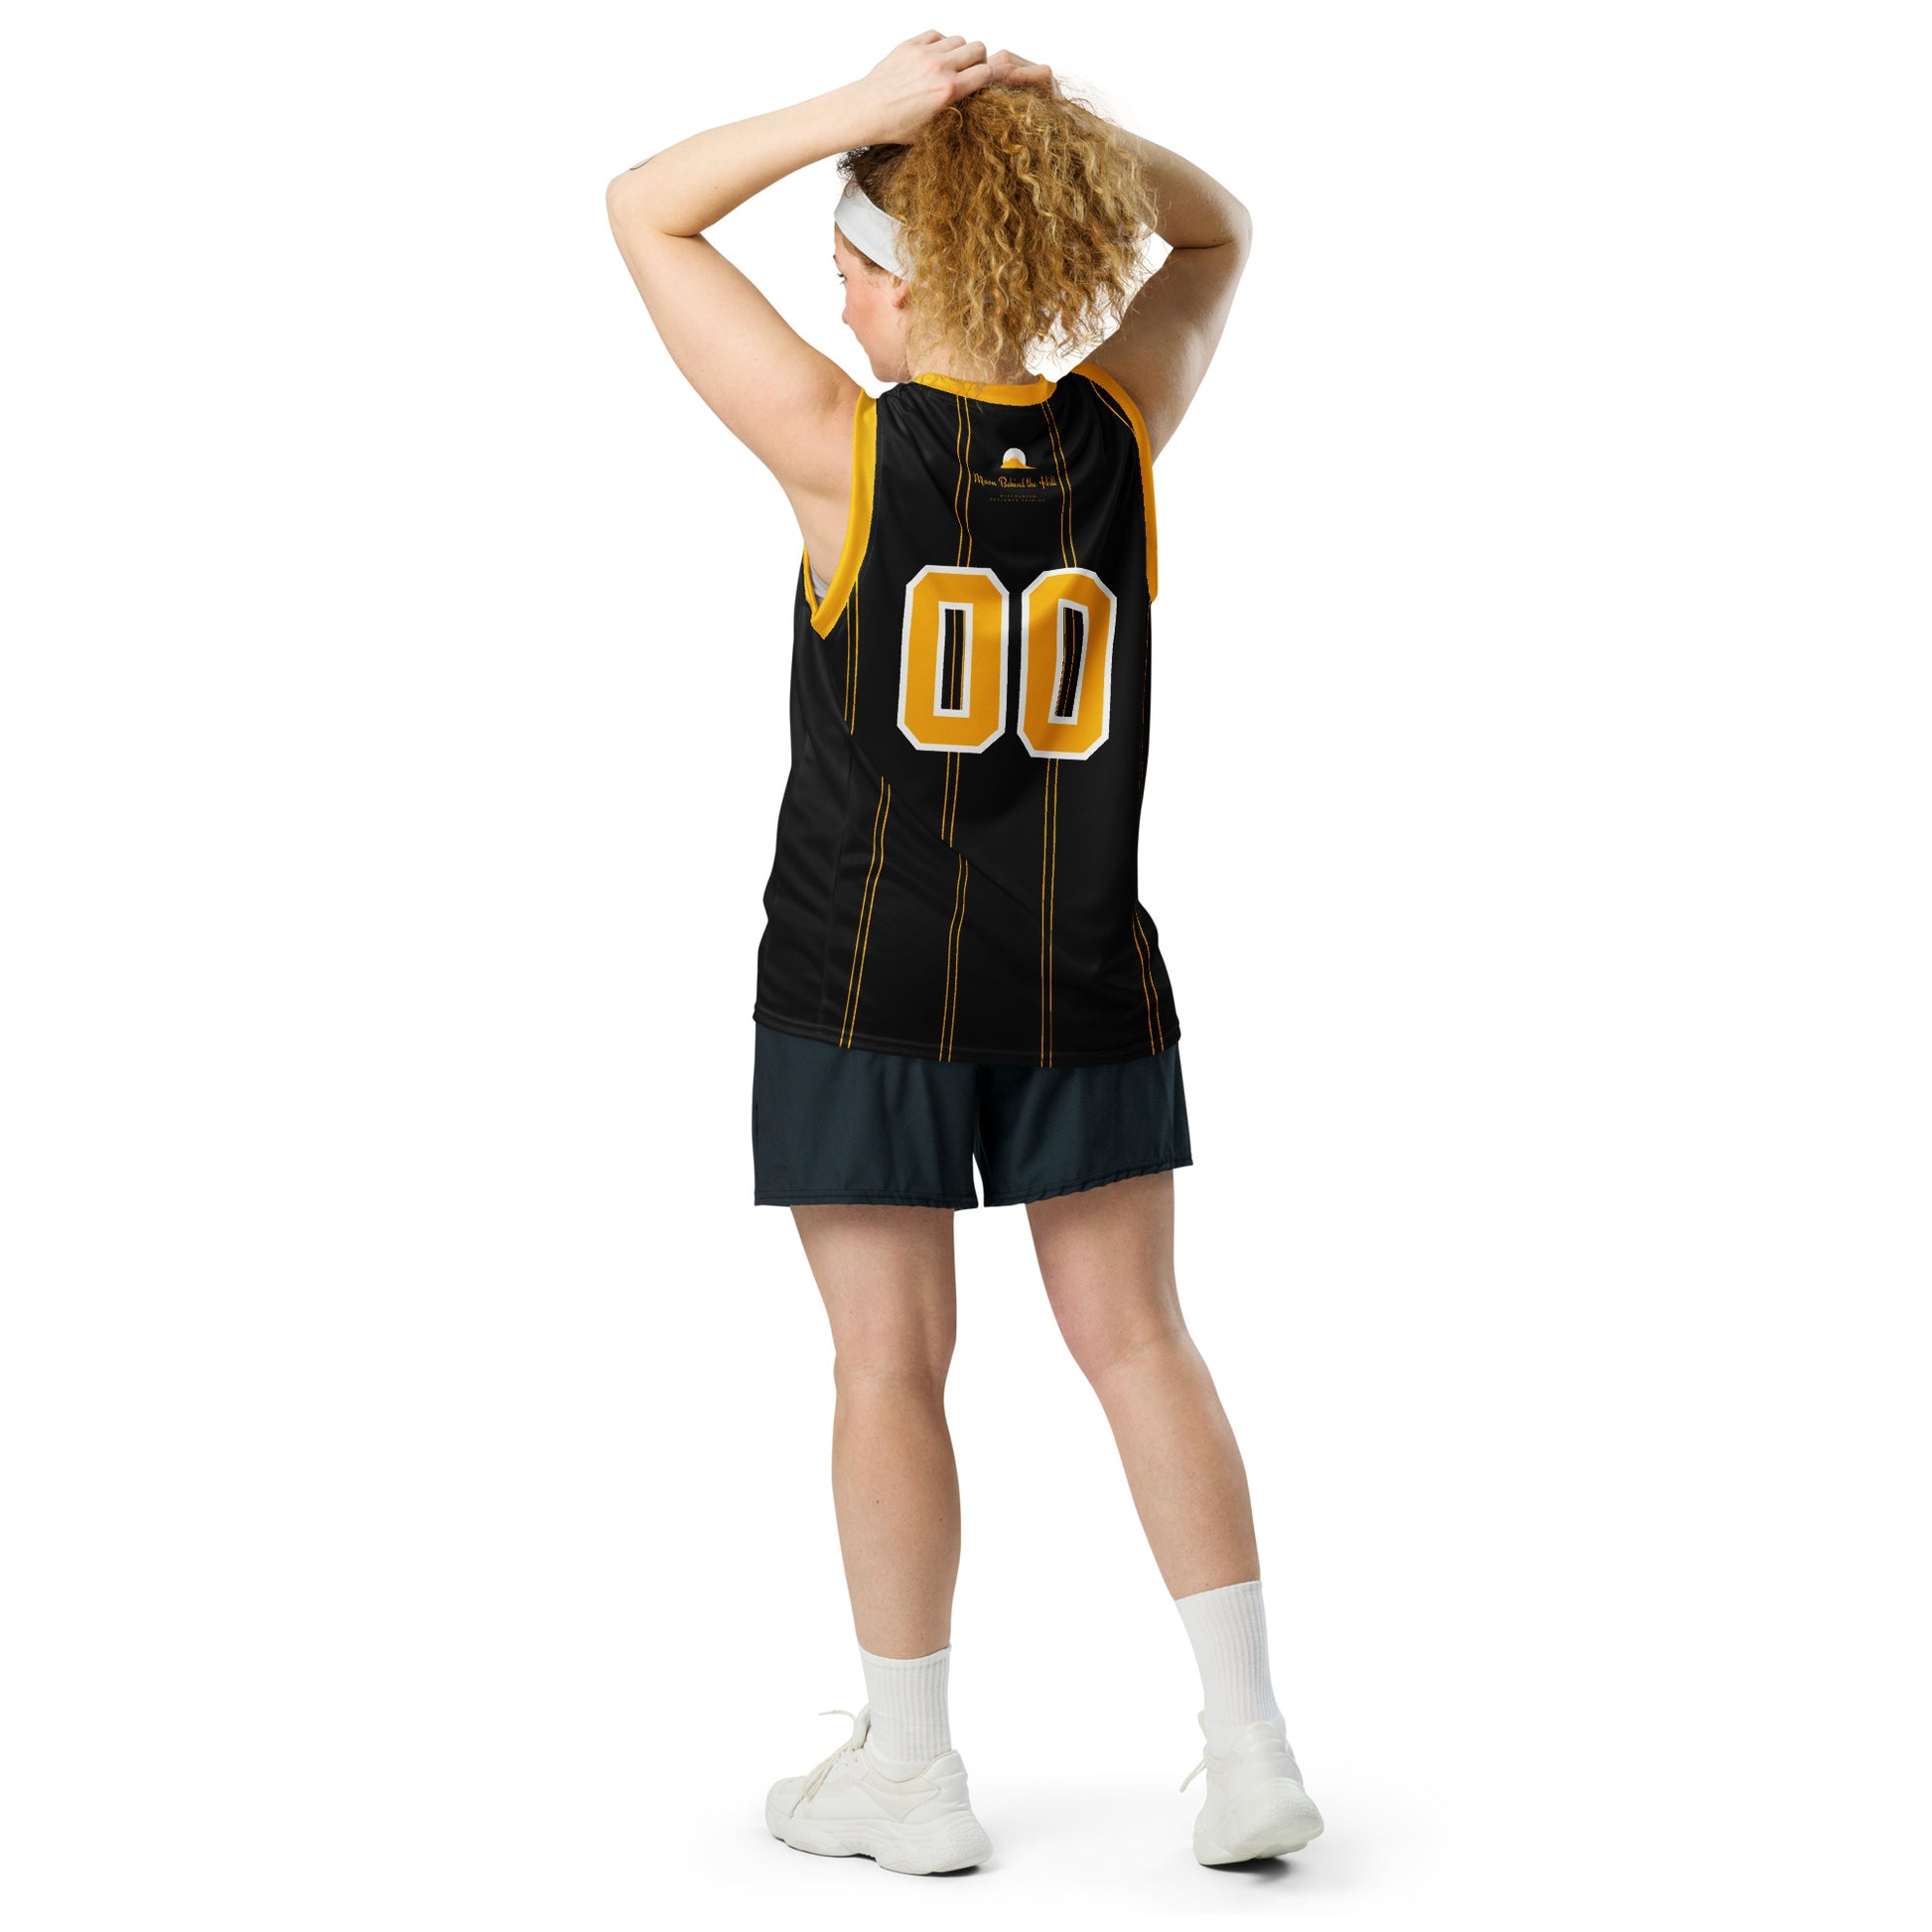 Club Amber #00 Unisex Basketball Jersey 2023 - Designed by Moon Behind The Hill Available to Buy at a Discounted Price on Moon Behind The Hill Online Designer Discount Store